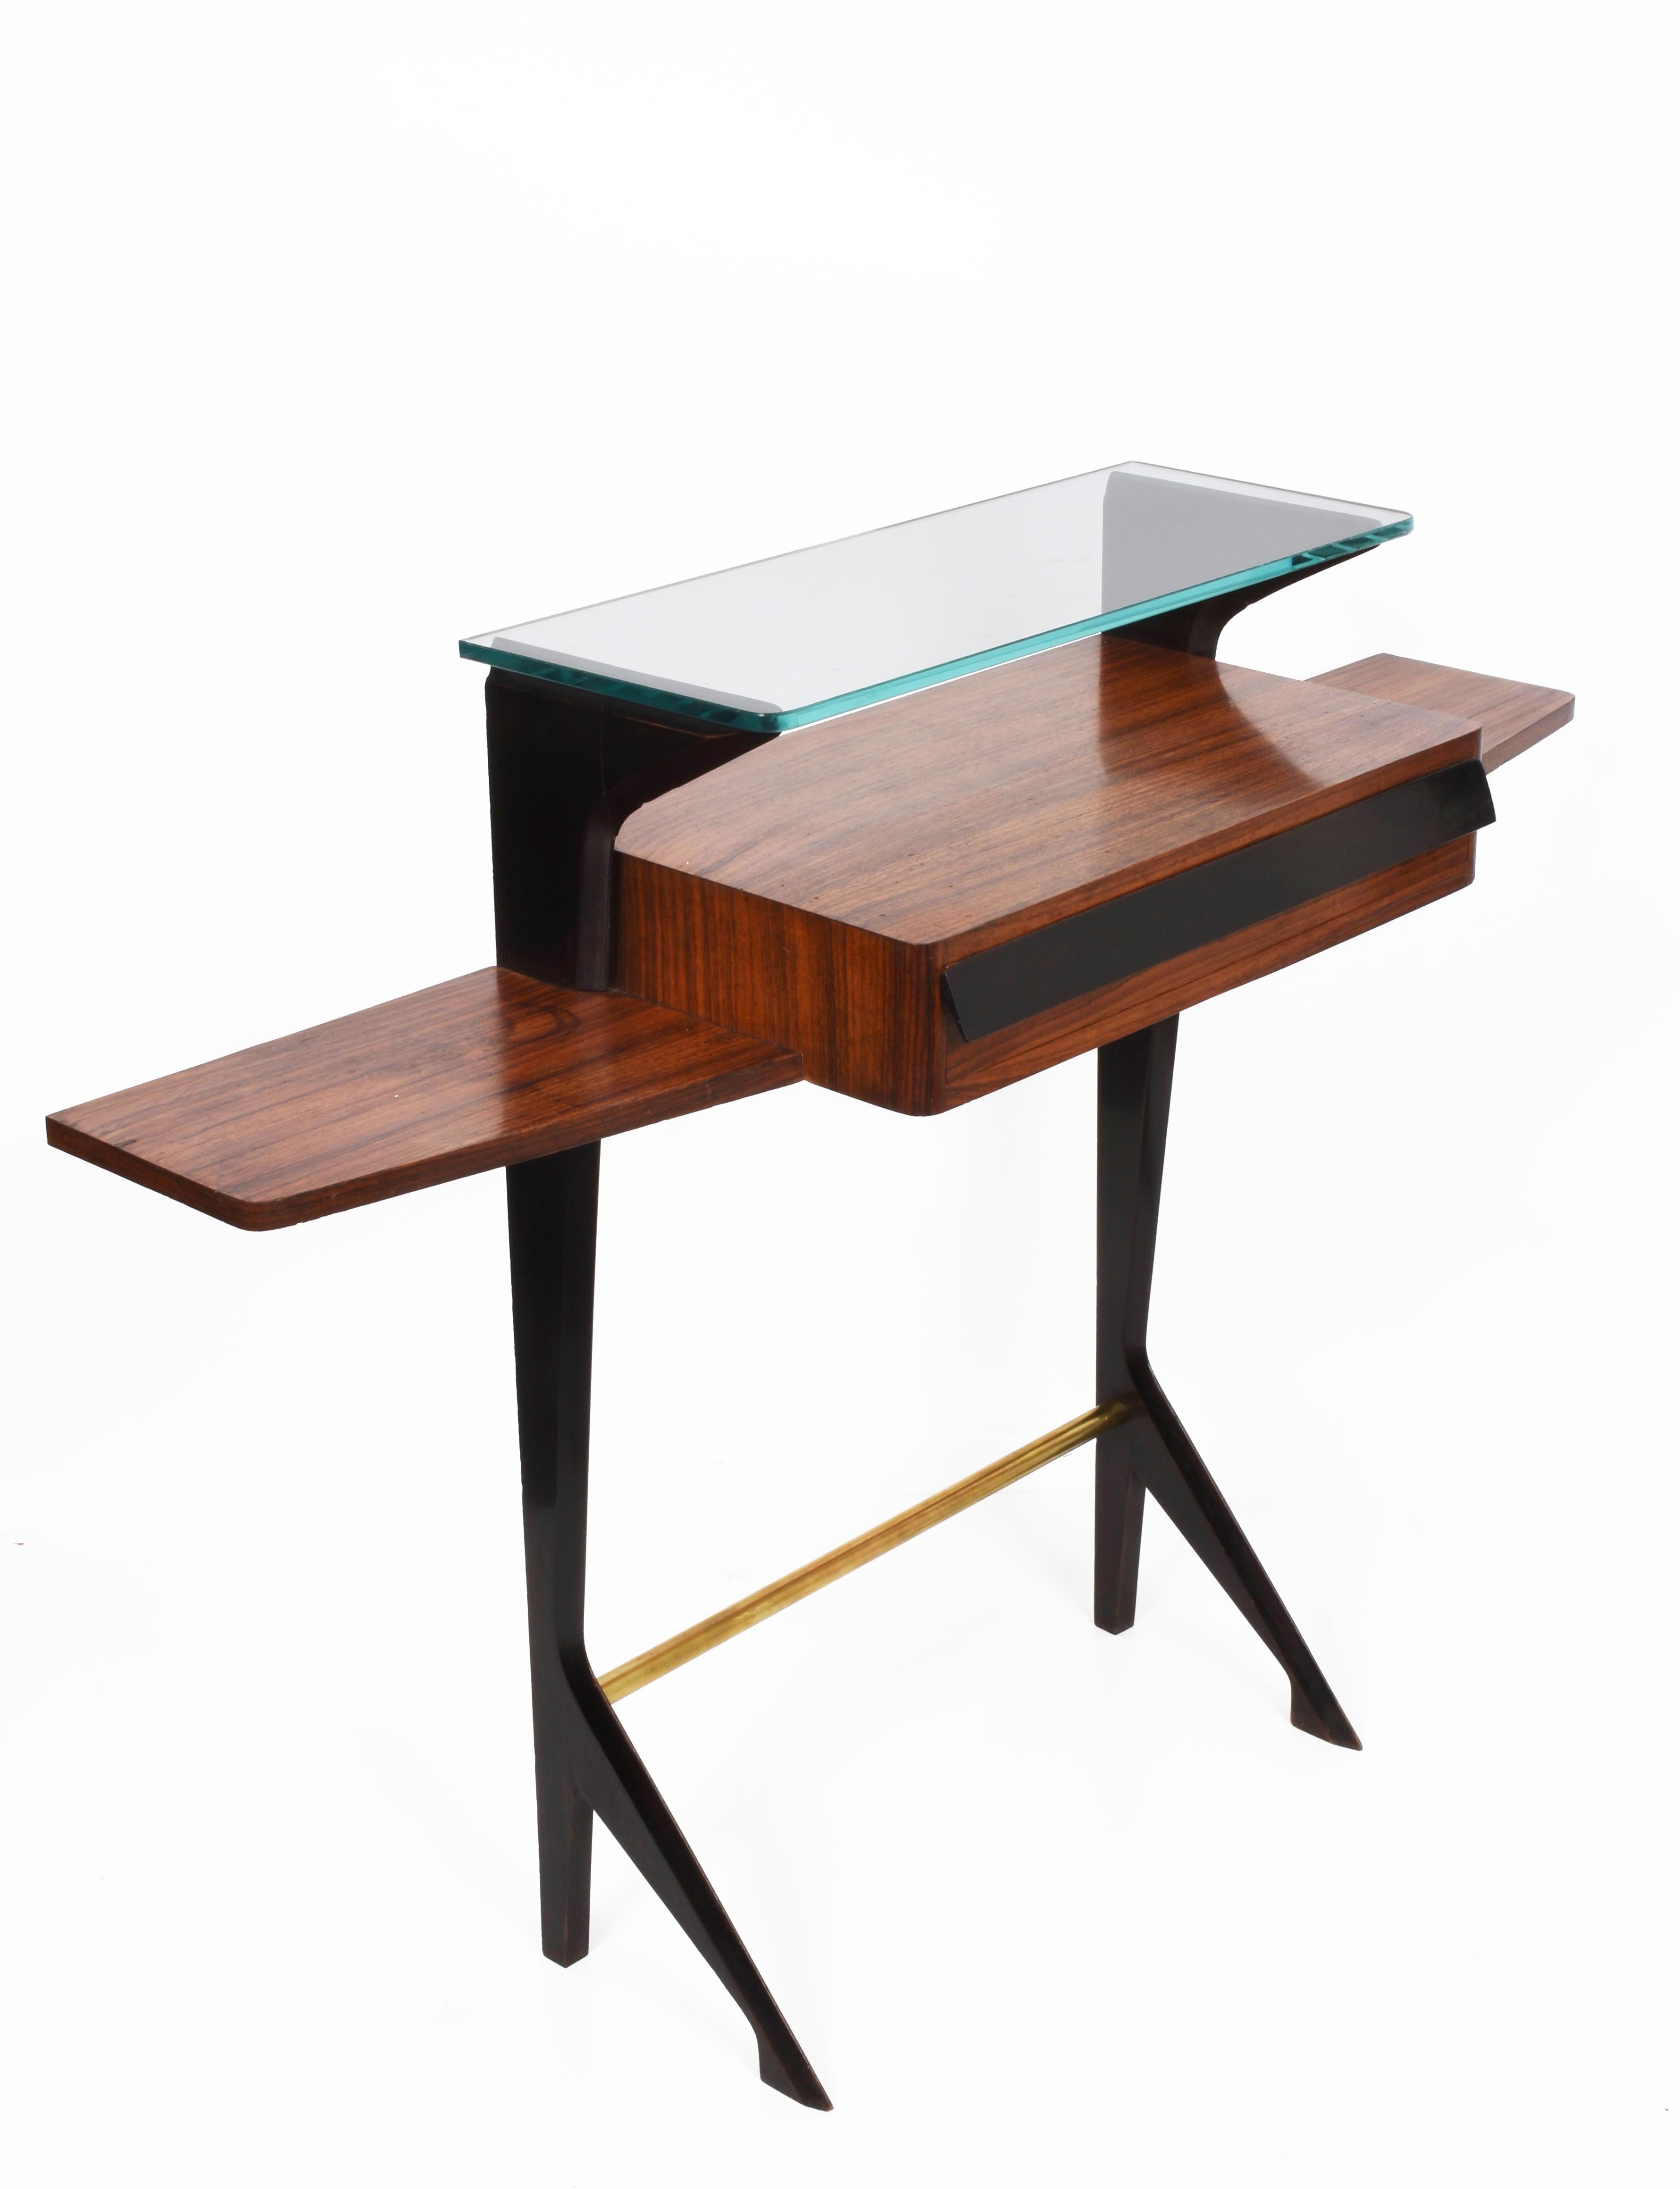 Wonderful midcentury wooden, brass and glass console table attributed to Ico Parisi.

The interior elegance of this surprising piece, the legs in black and the small drawer in black lacquered wood. The legs provide a great open view and show an